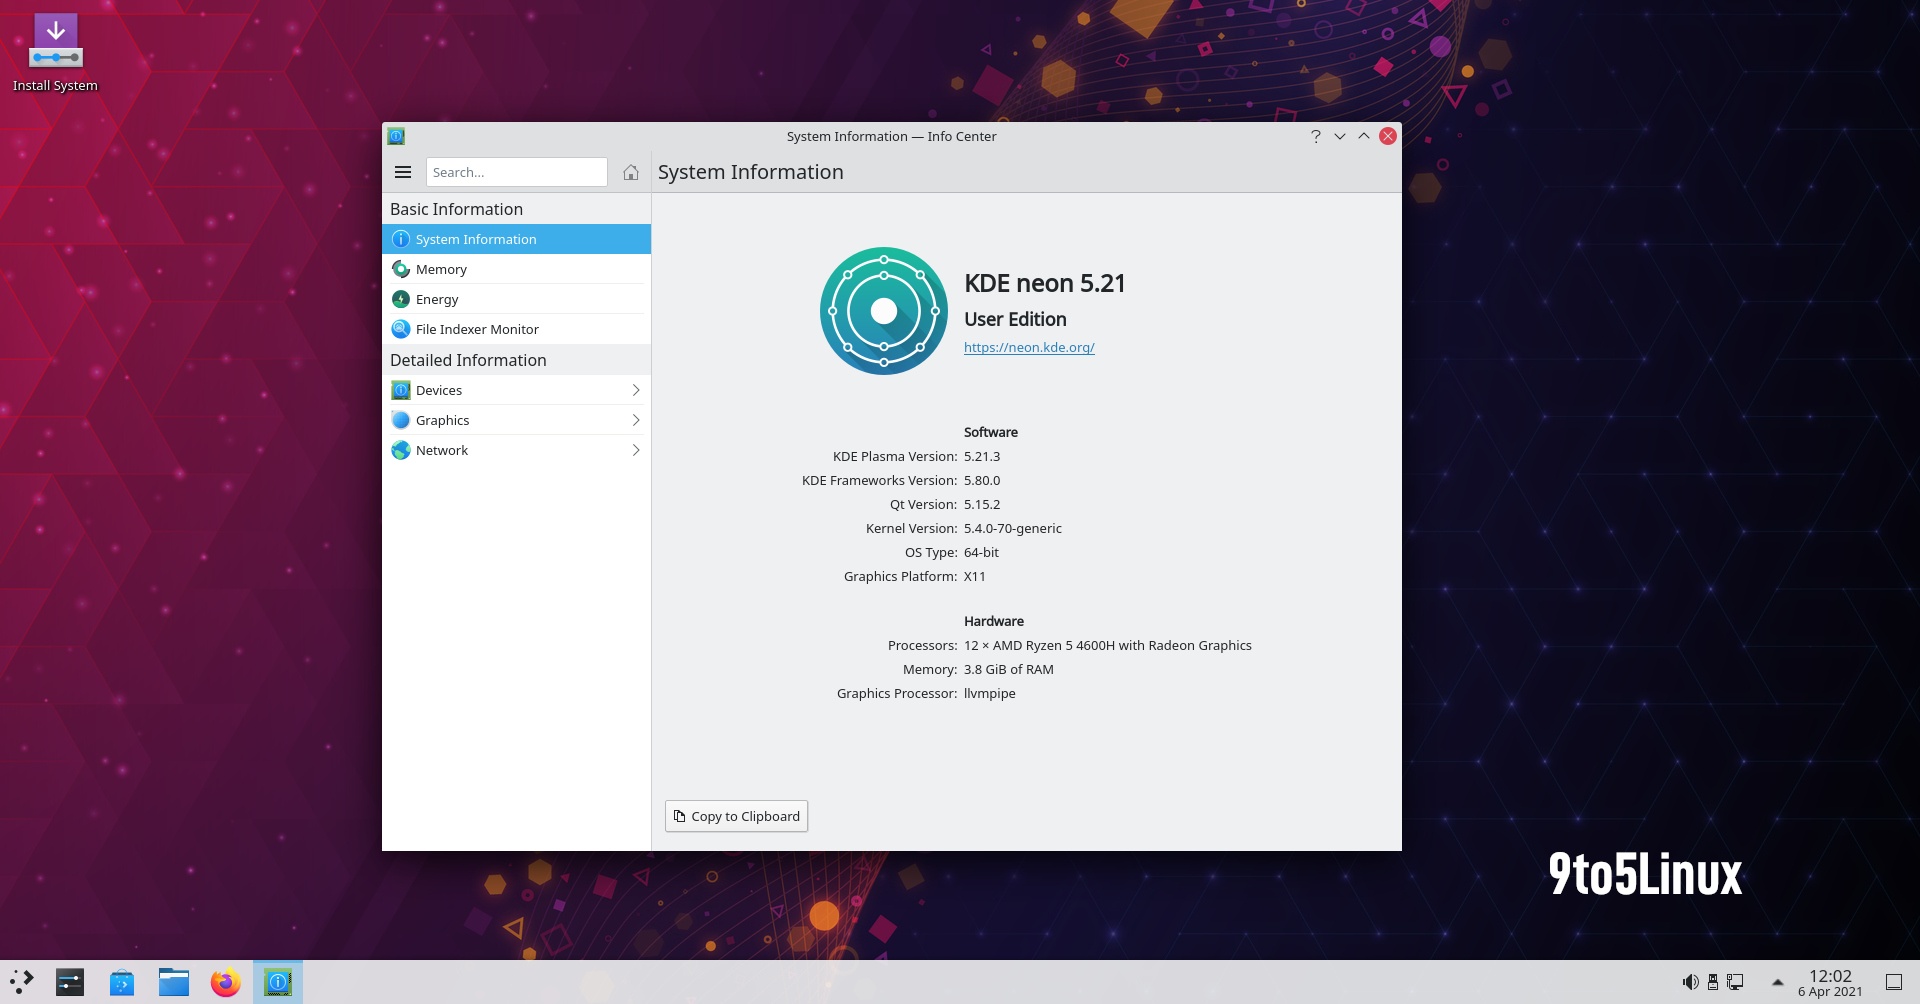 KDE neon Introduces Offline Updates, Puts an End to the Plasma LTS Edition